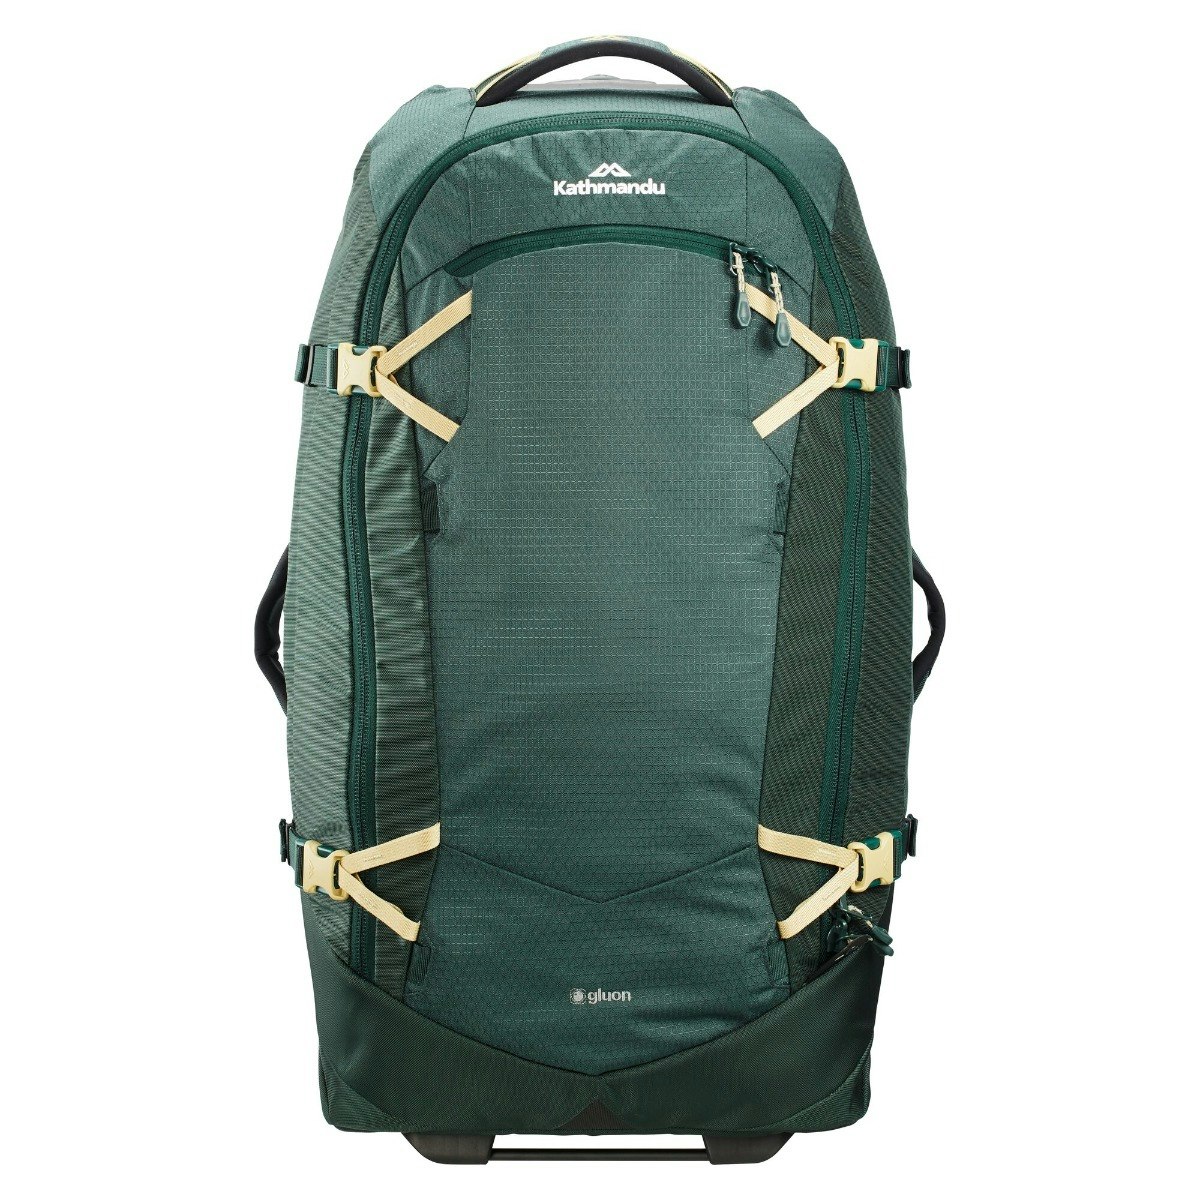 saucony backpack 2015